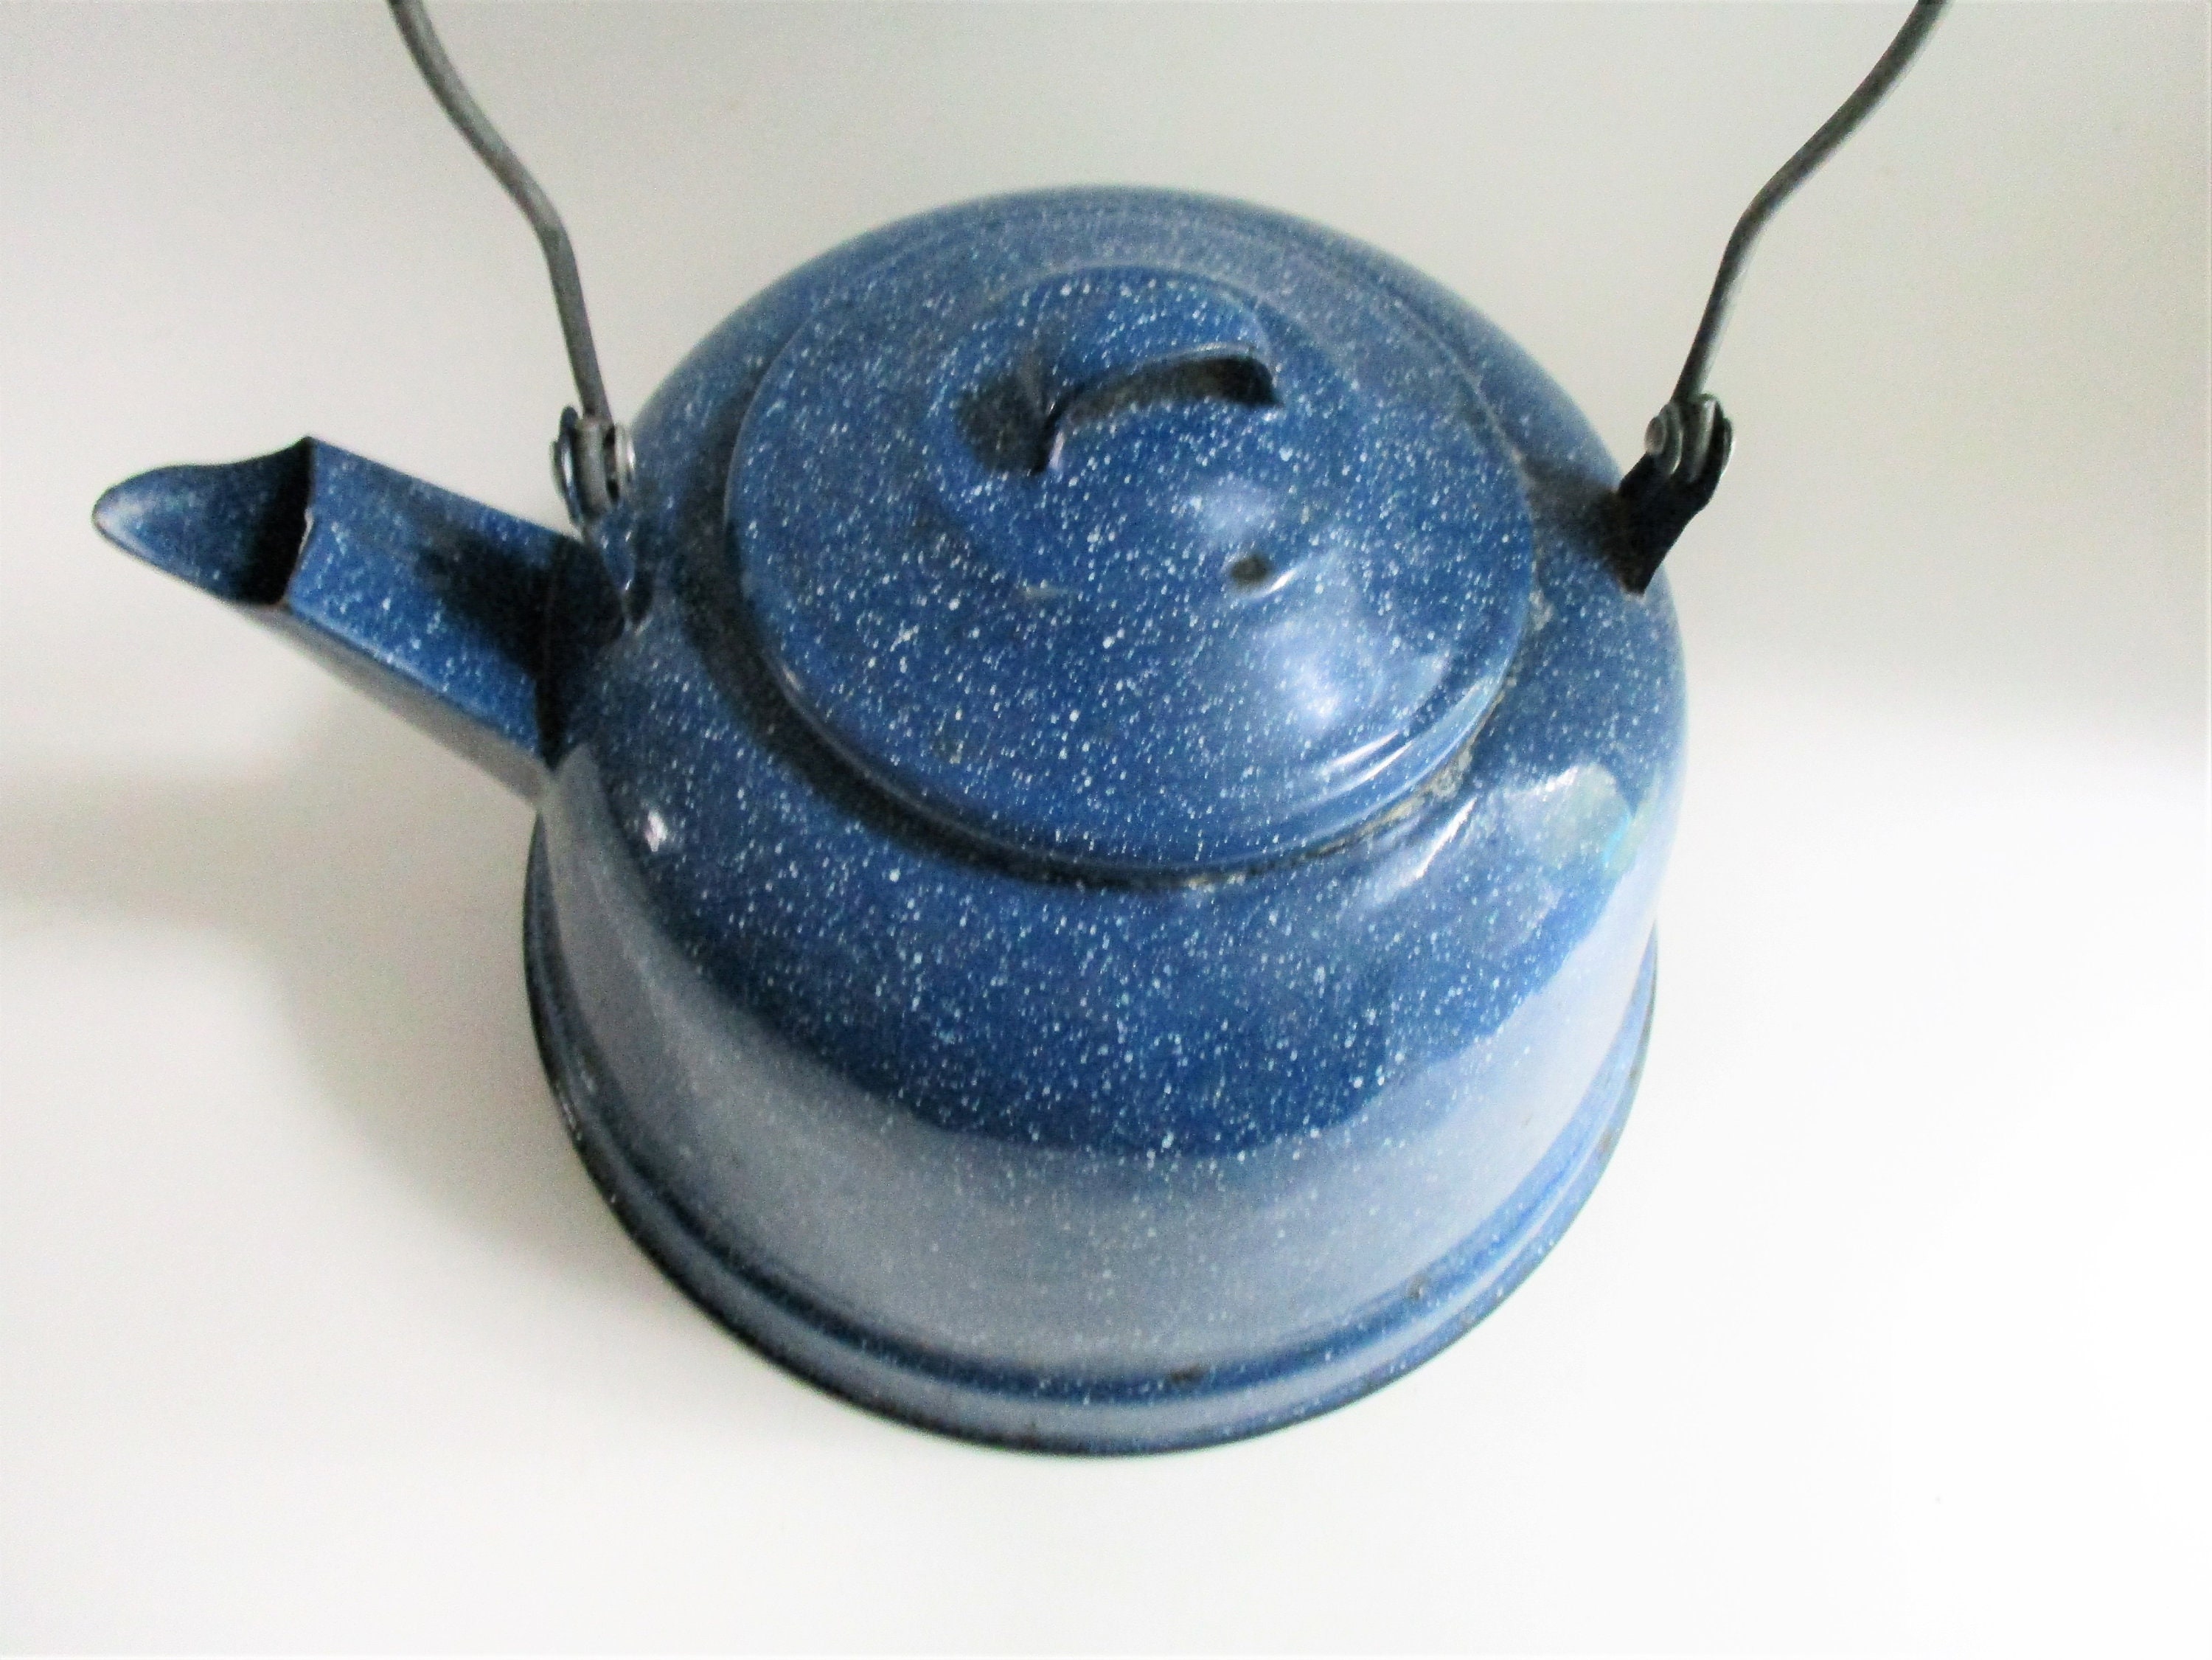 Kitchen, Blue Enamel Ware Kettle No Lid Immaculate Shape No Rust Or Chips  Tea Pot